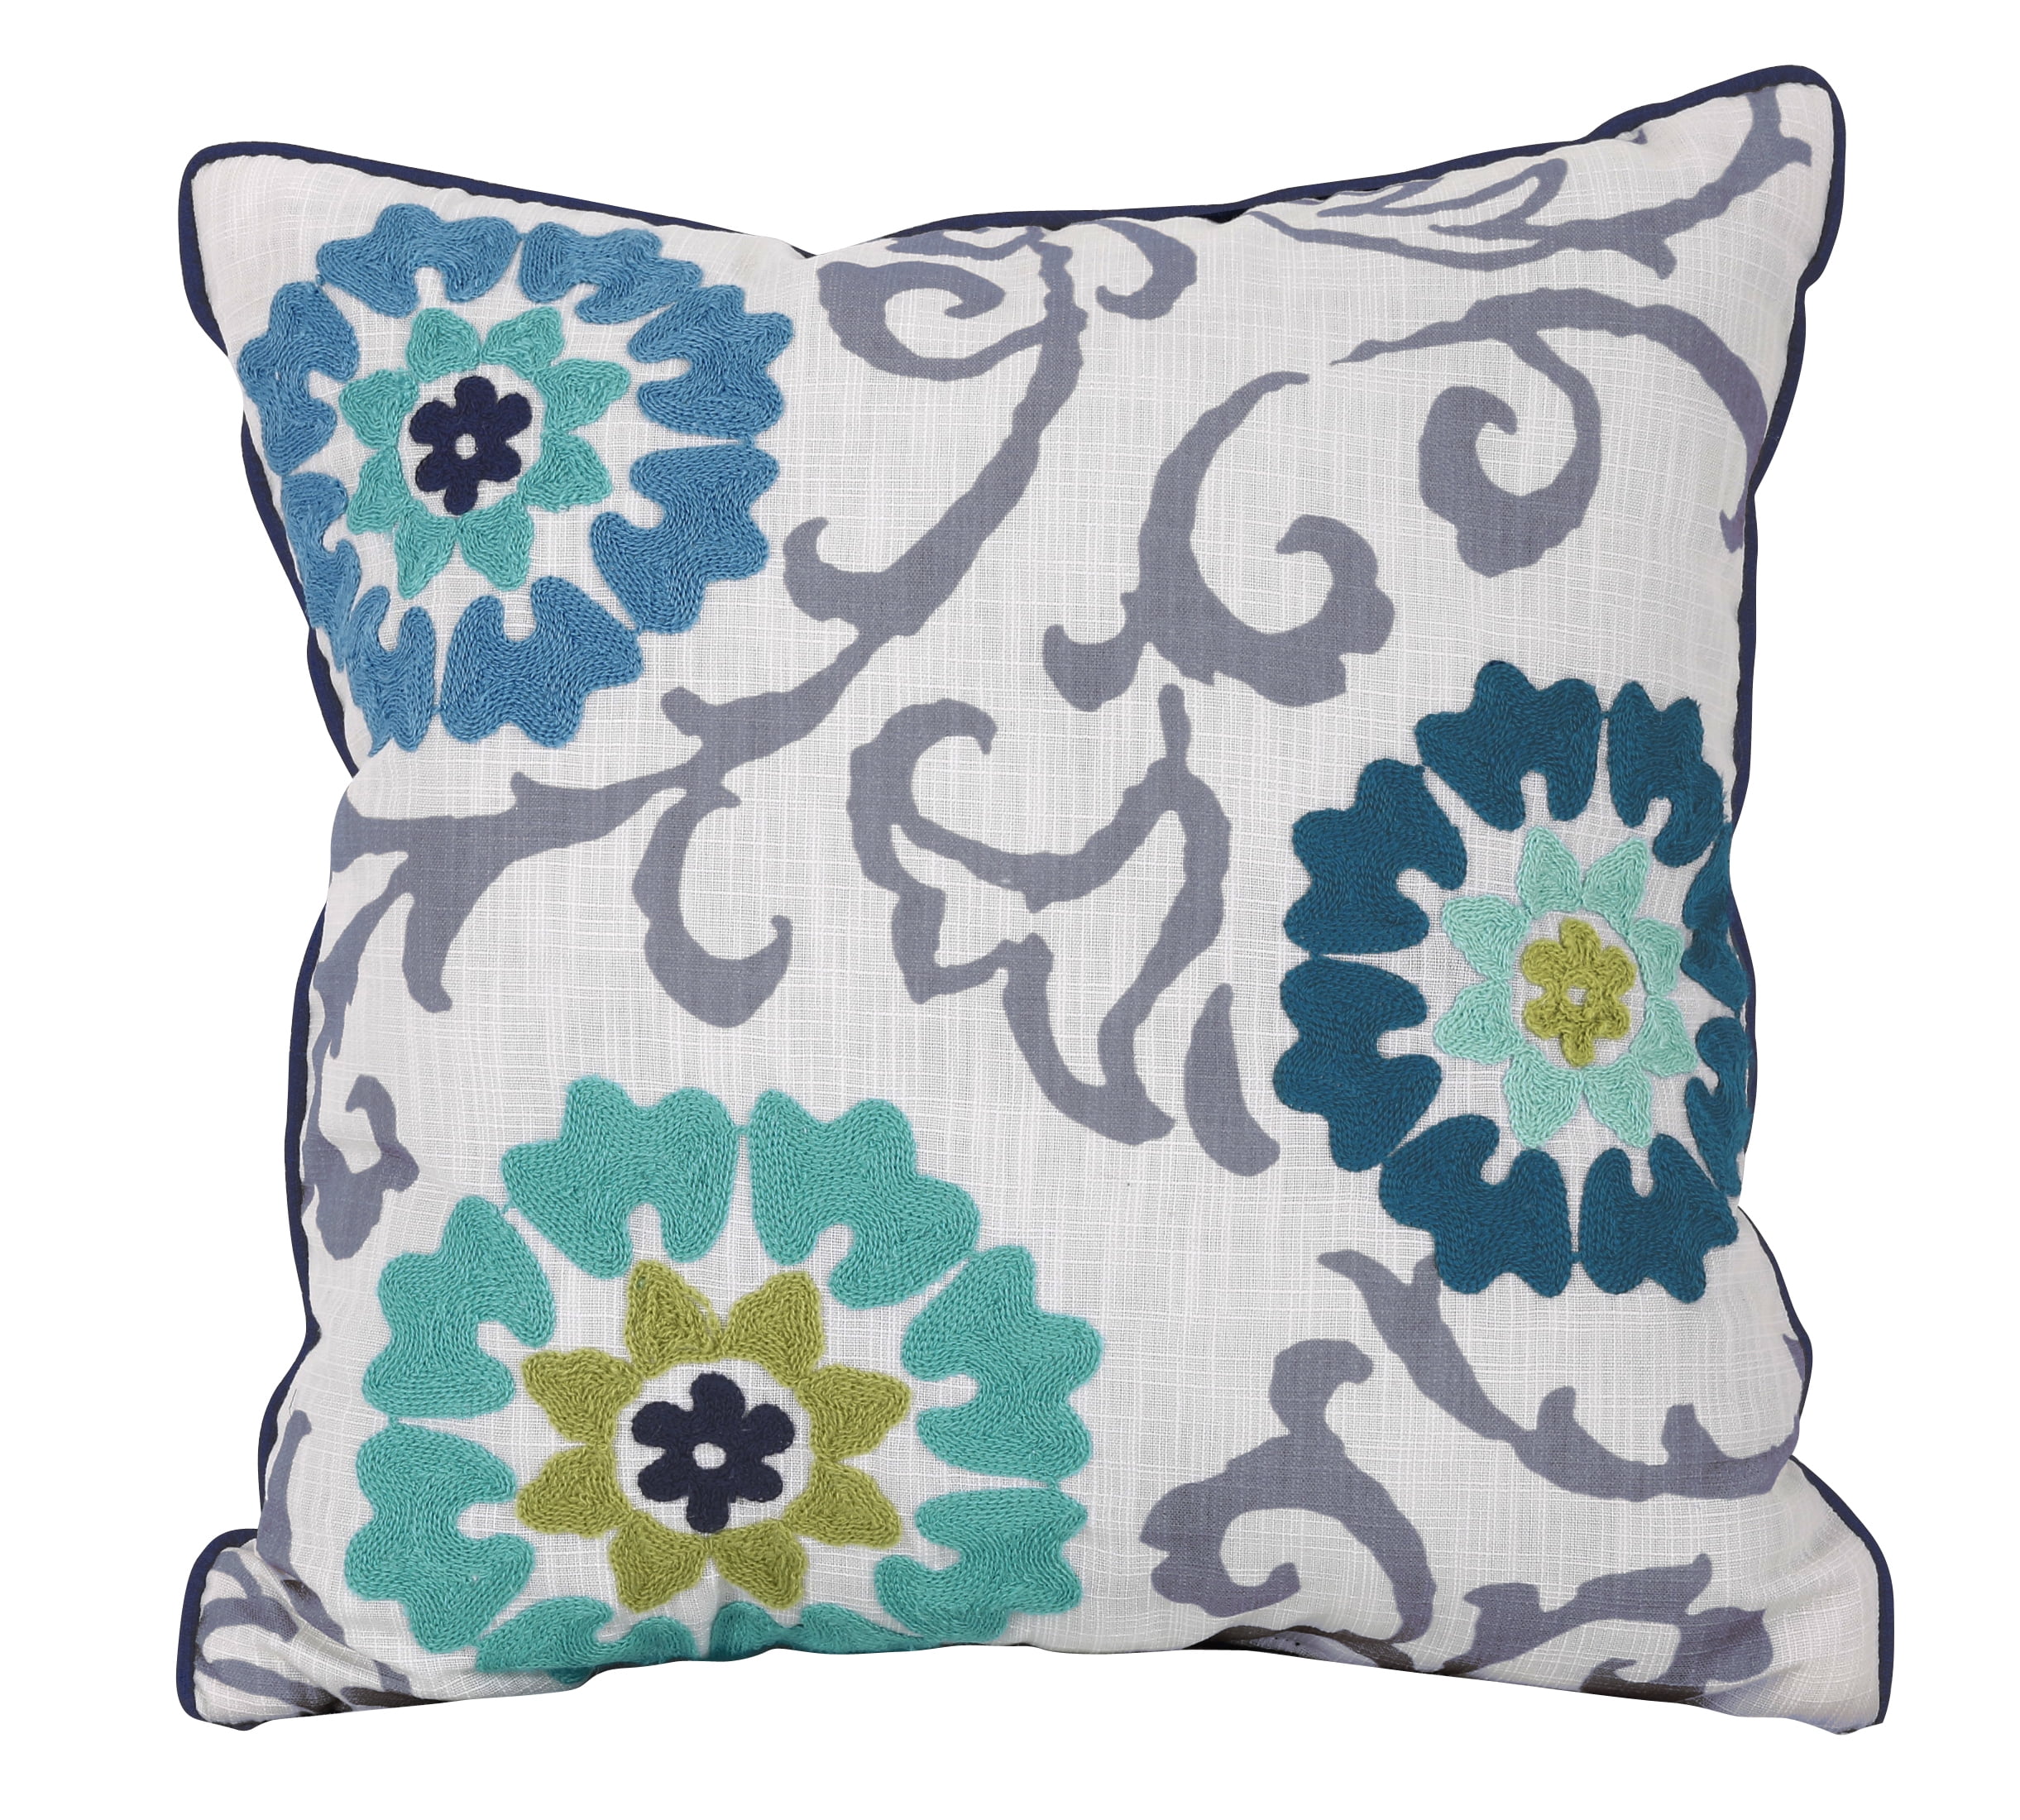 More than Throw Pillows with Blue & Co.